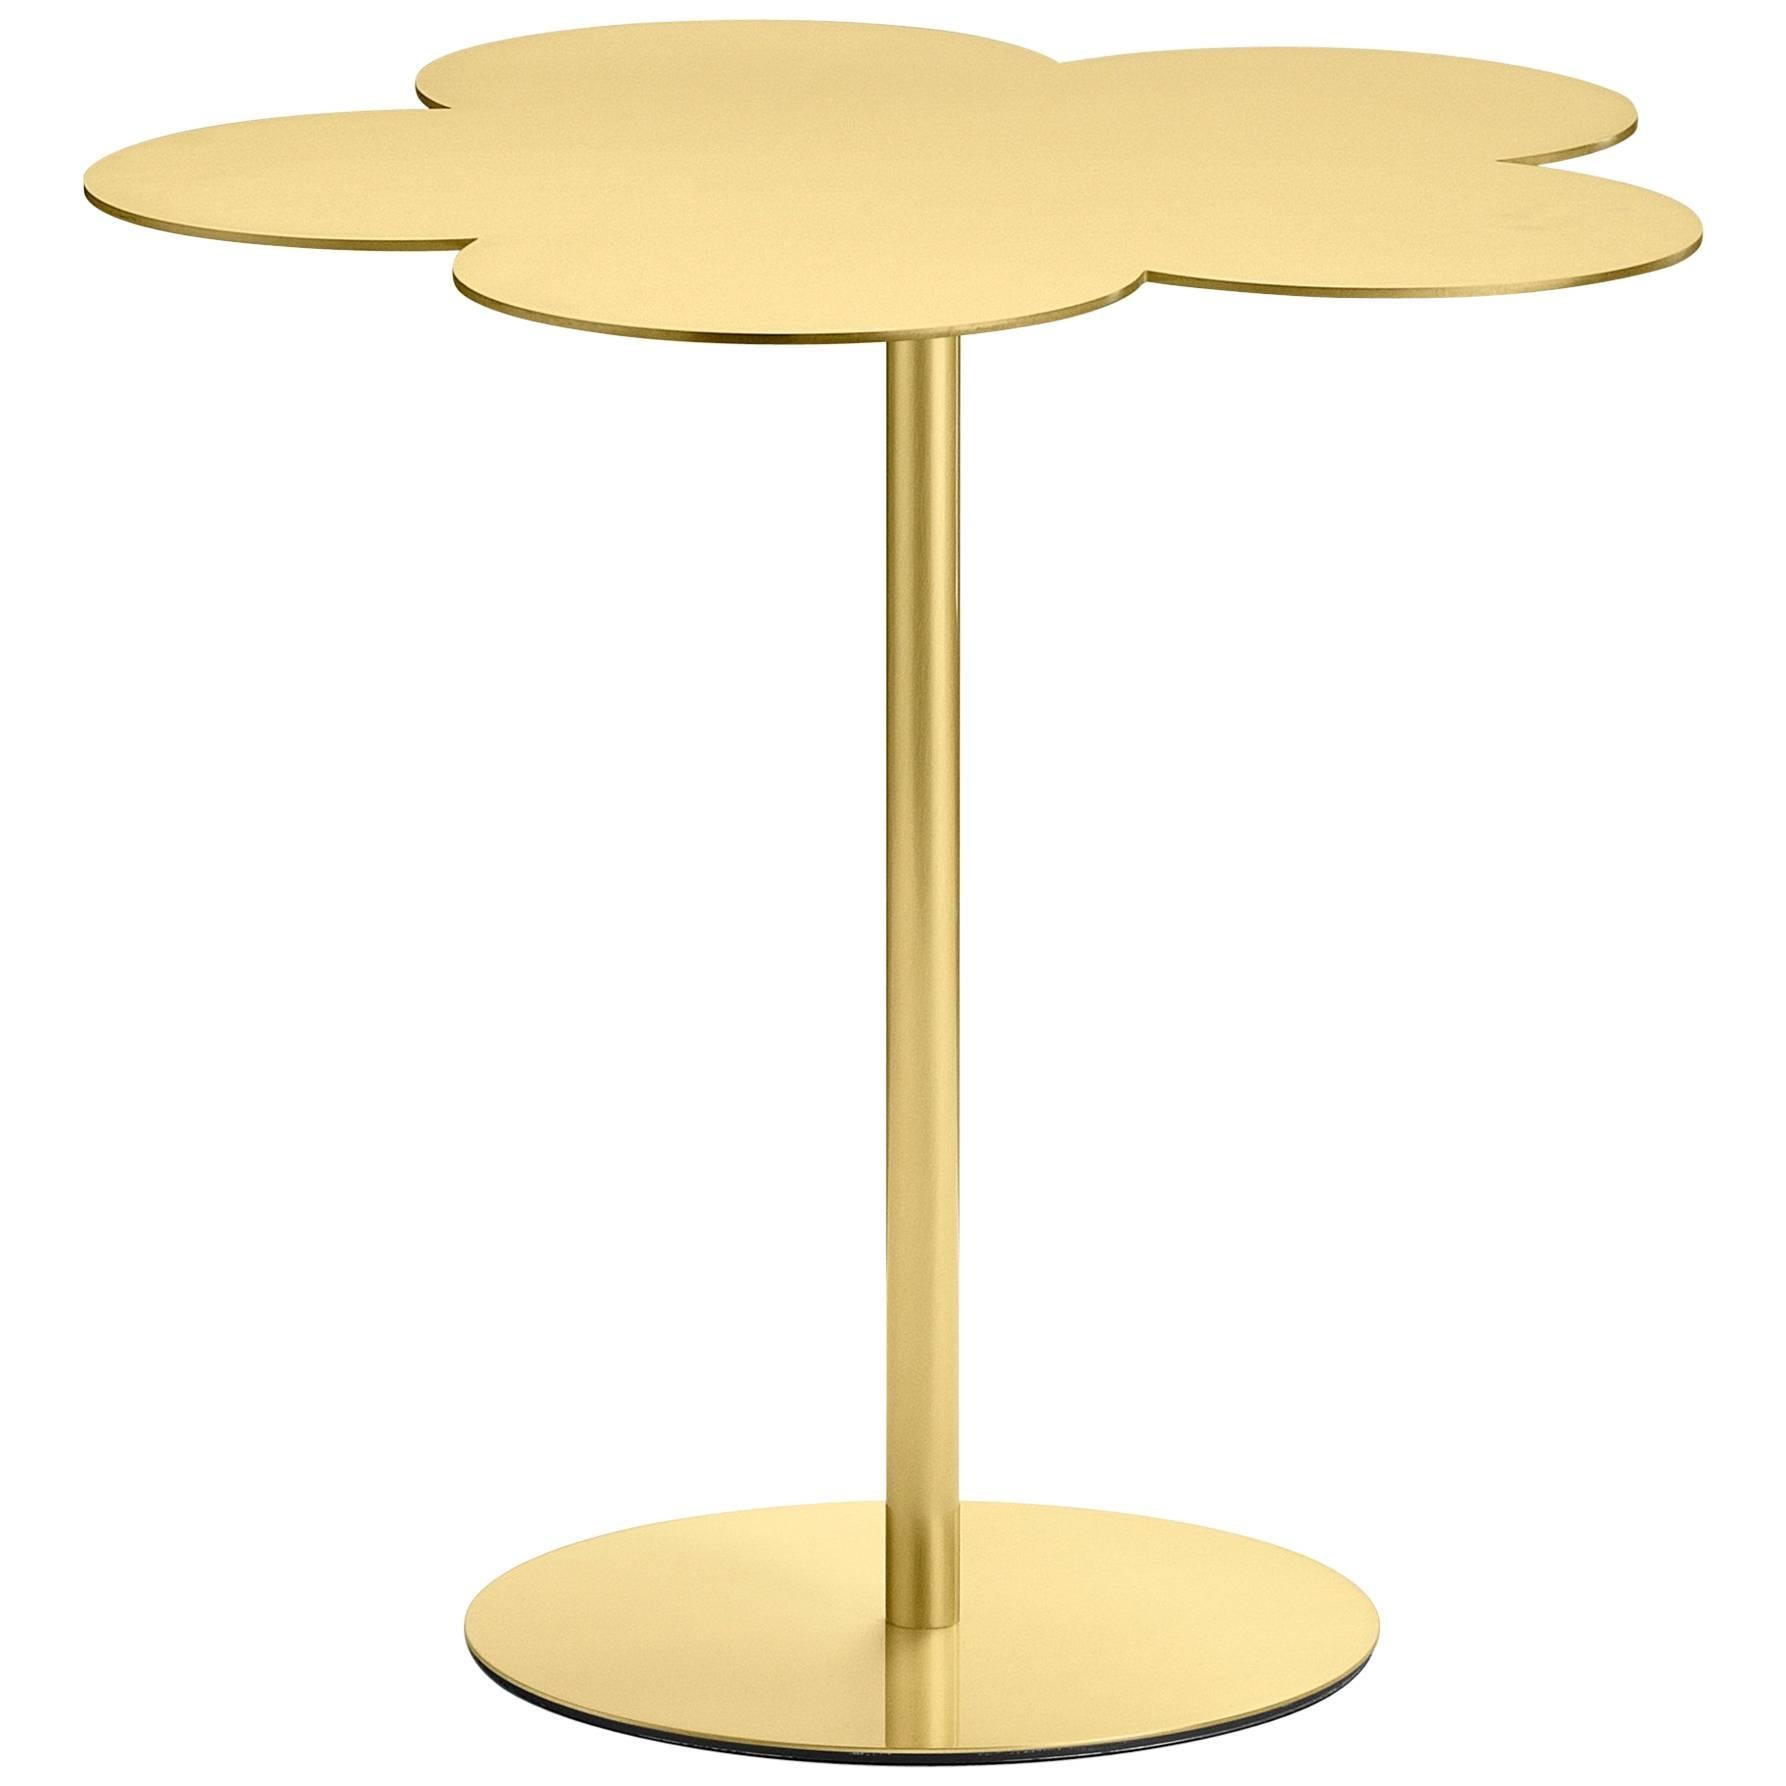 Ghidini 1961 Flowers Large Side Coffee Table in Satin Brass Finish For Sale